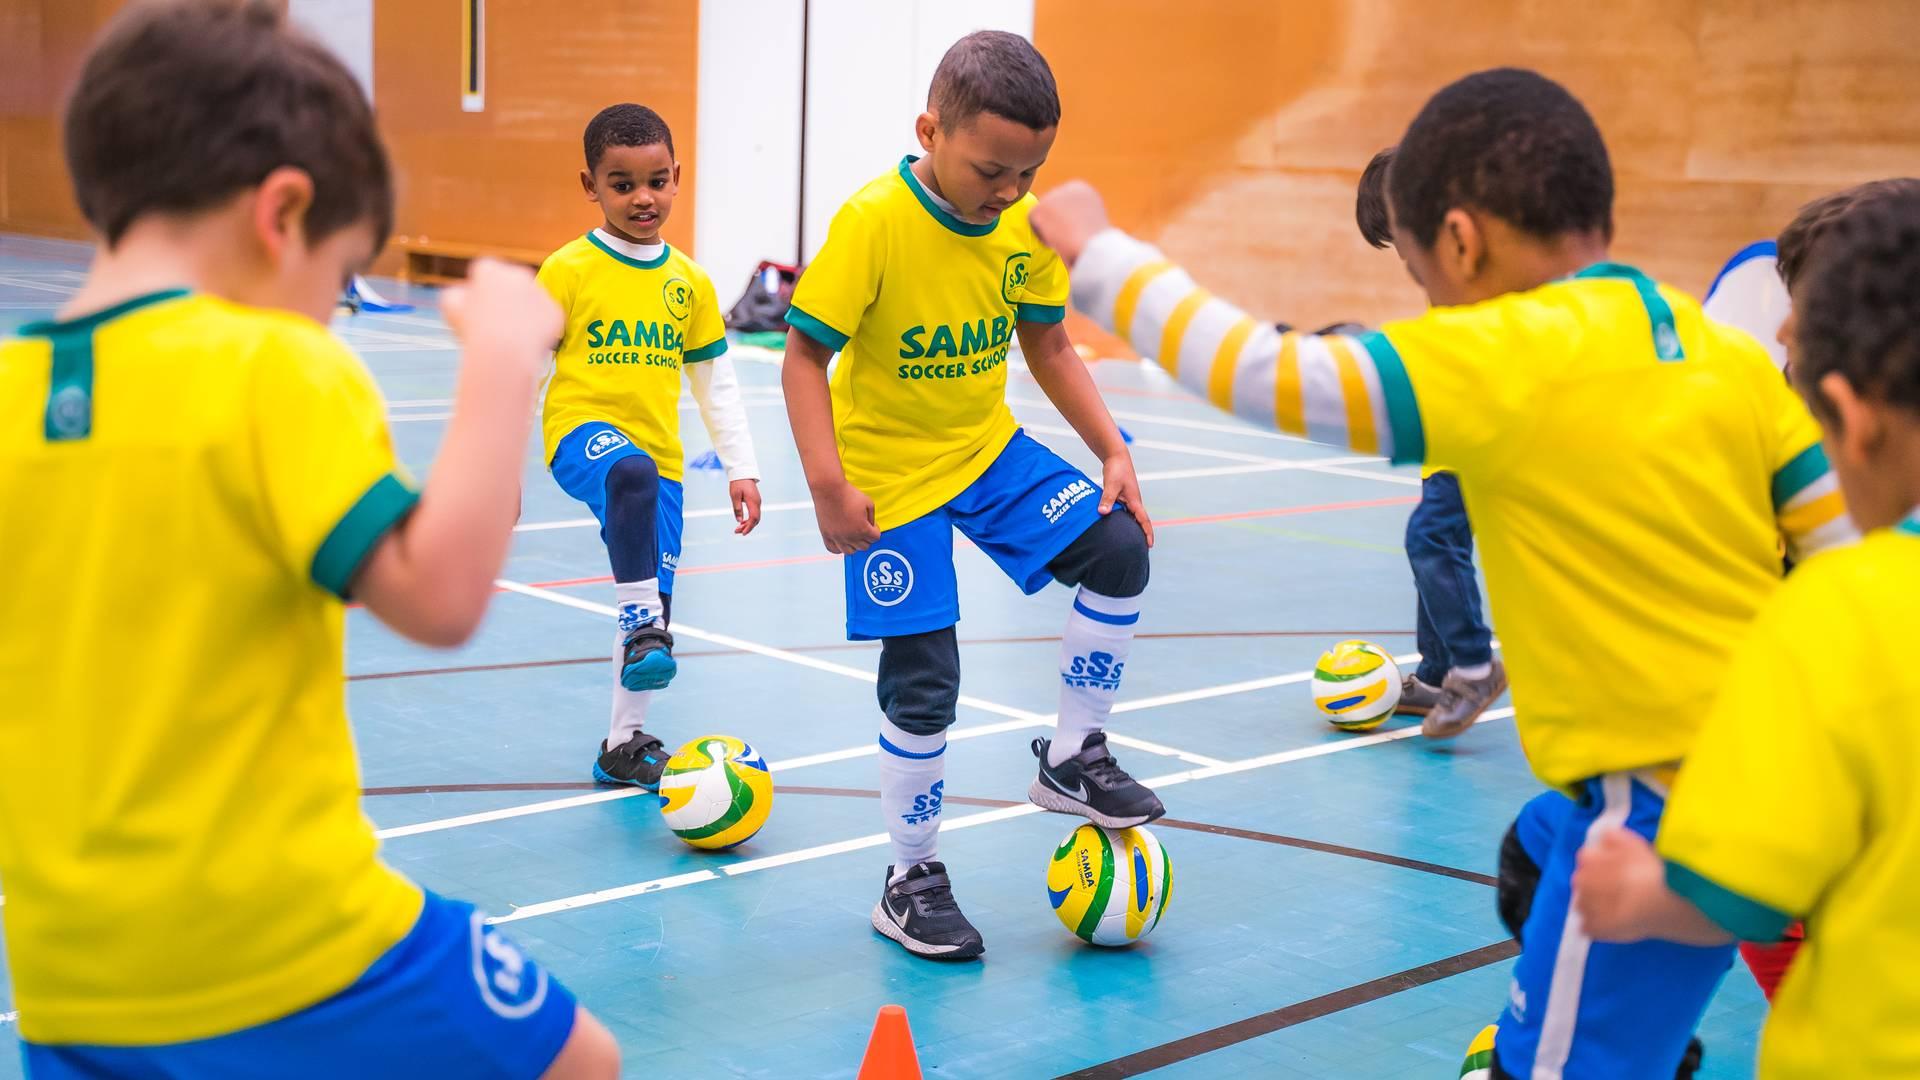 [Brixton] Football Classes for Kids aged 4-12 photo